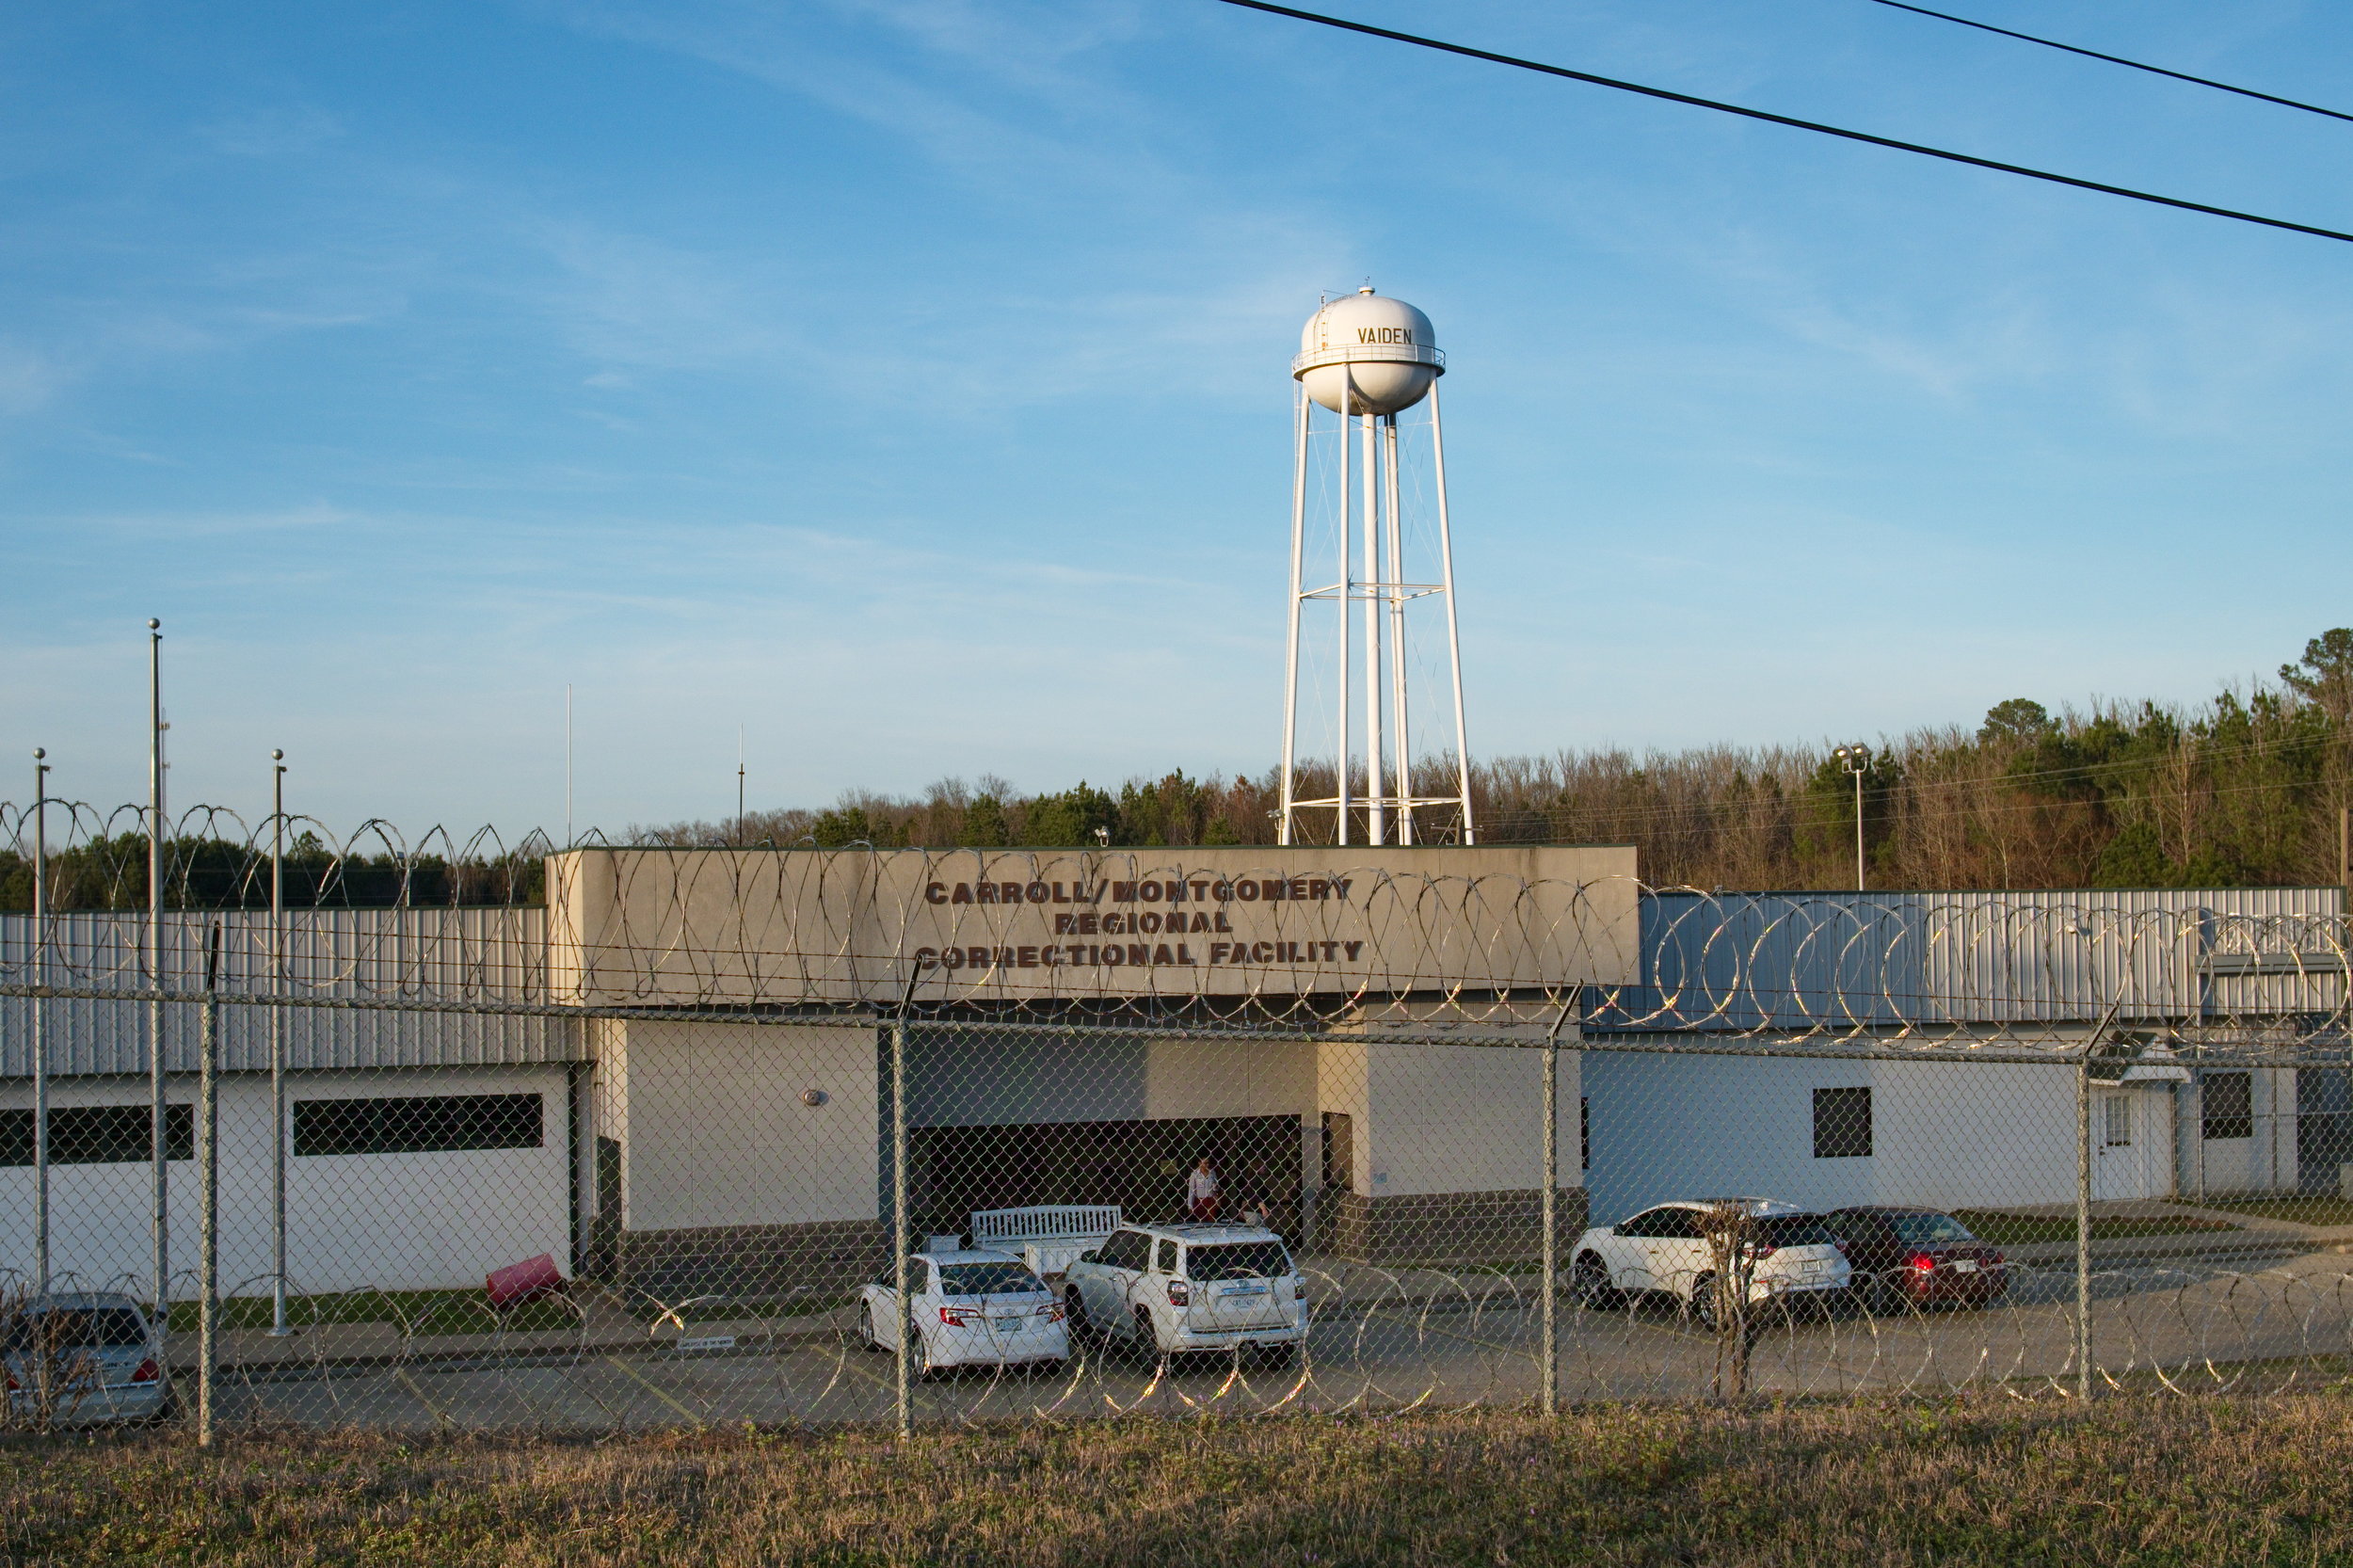  One of the satellite branches in the correctional system in Mississippi, this one located near Vaiden 